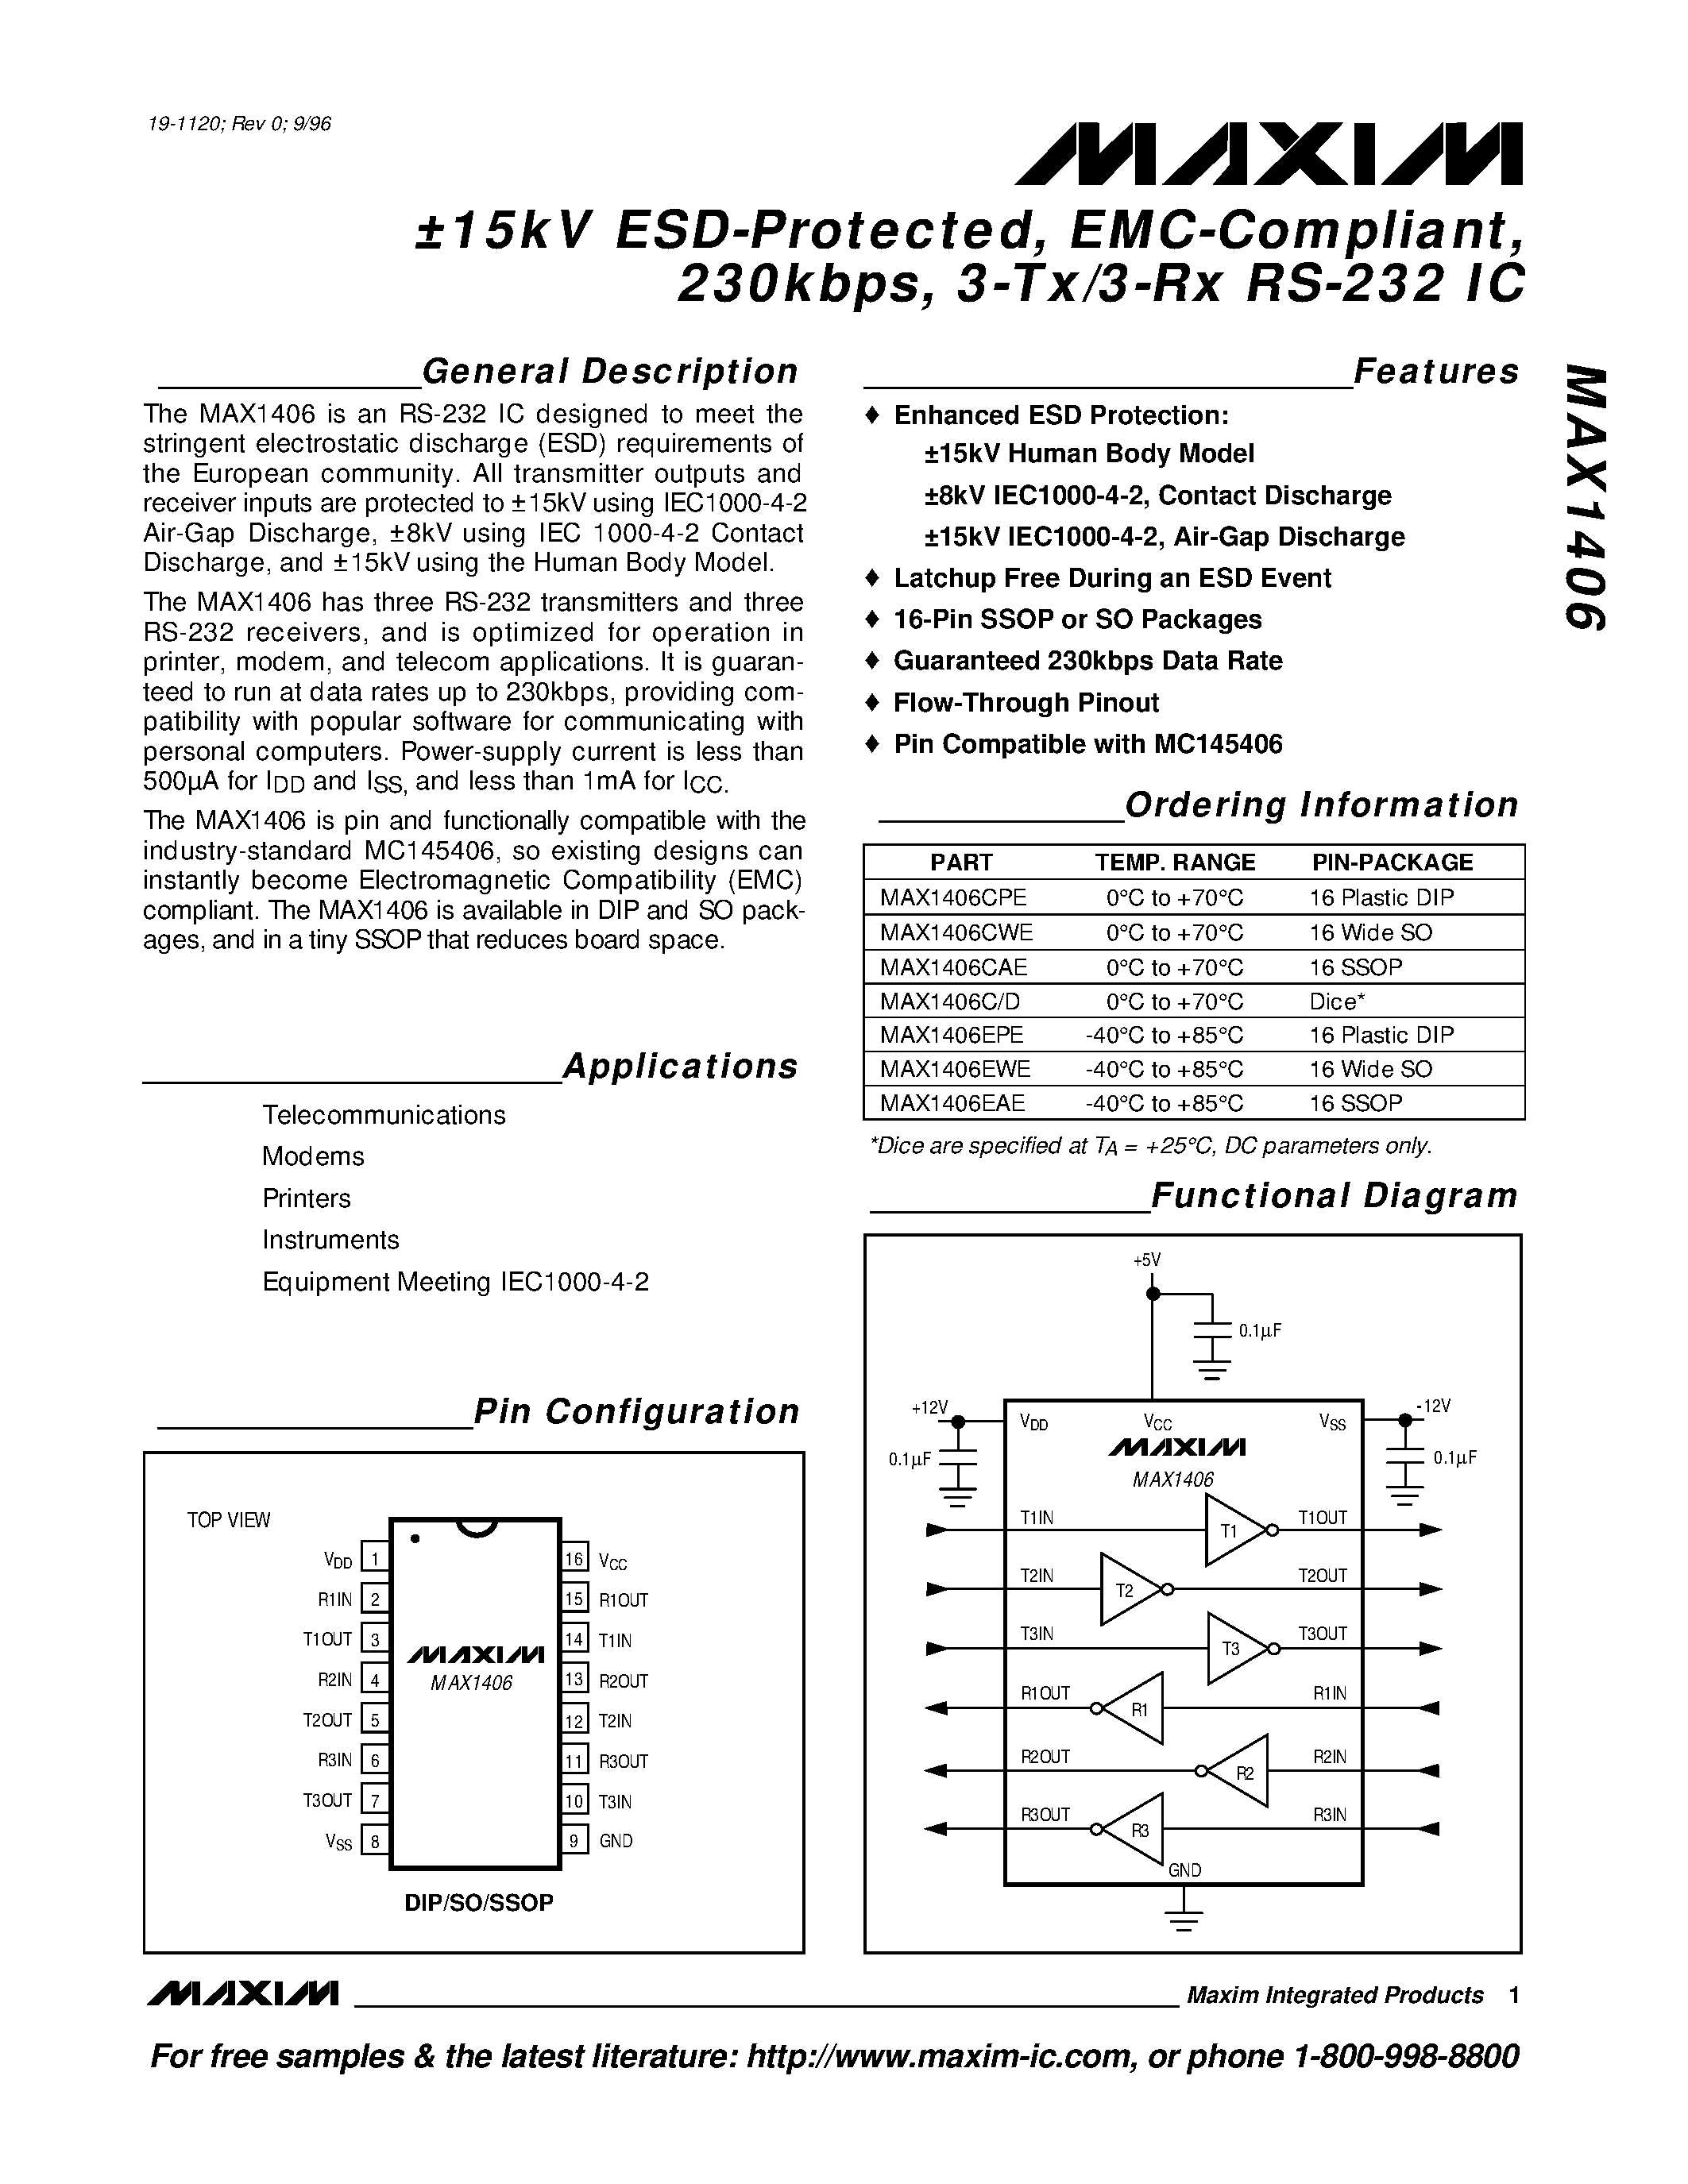 Datasheet MAX1406CPE - 15kV ESD-Protected / EMC-Compliant / 230kbps / 3-Tx/3-Rx RS-232 IC page 1